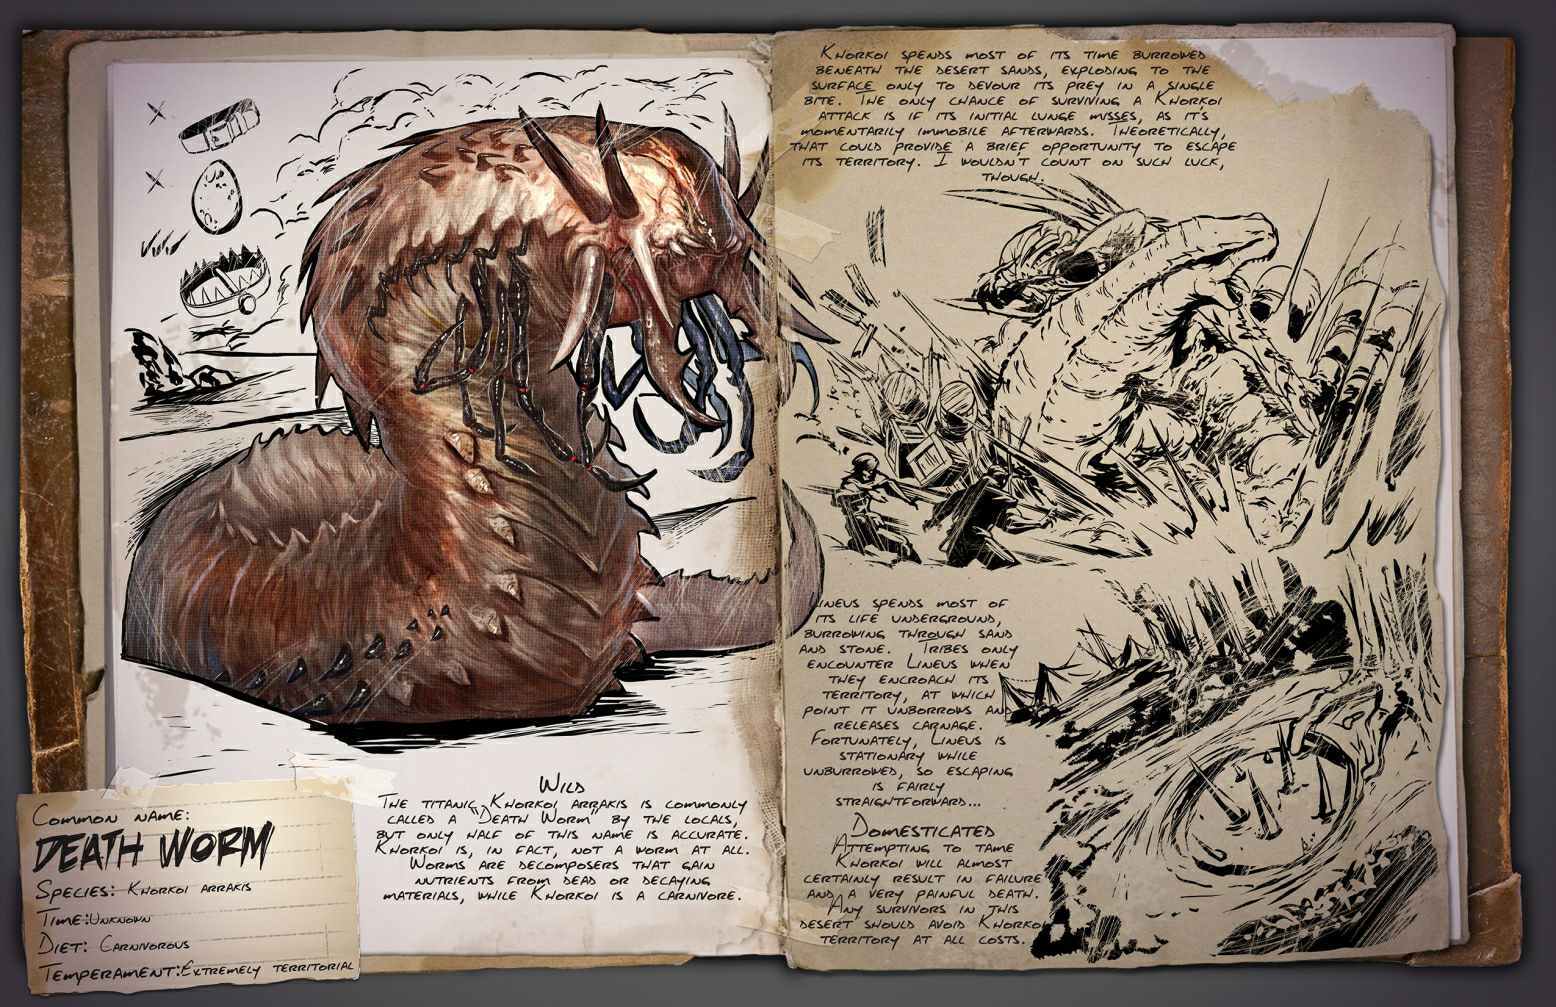 The Death Worm from ARK